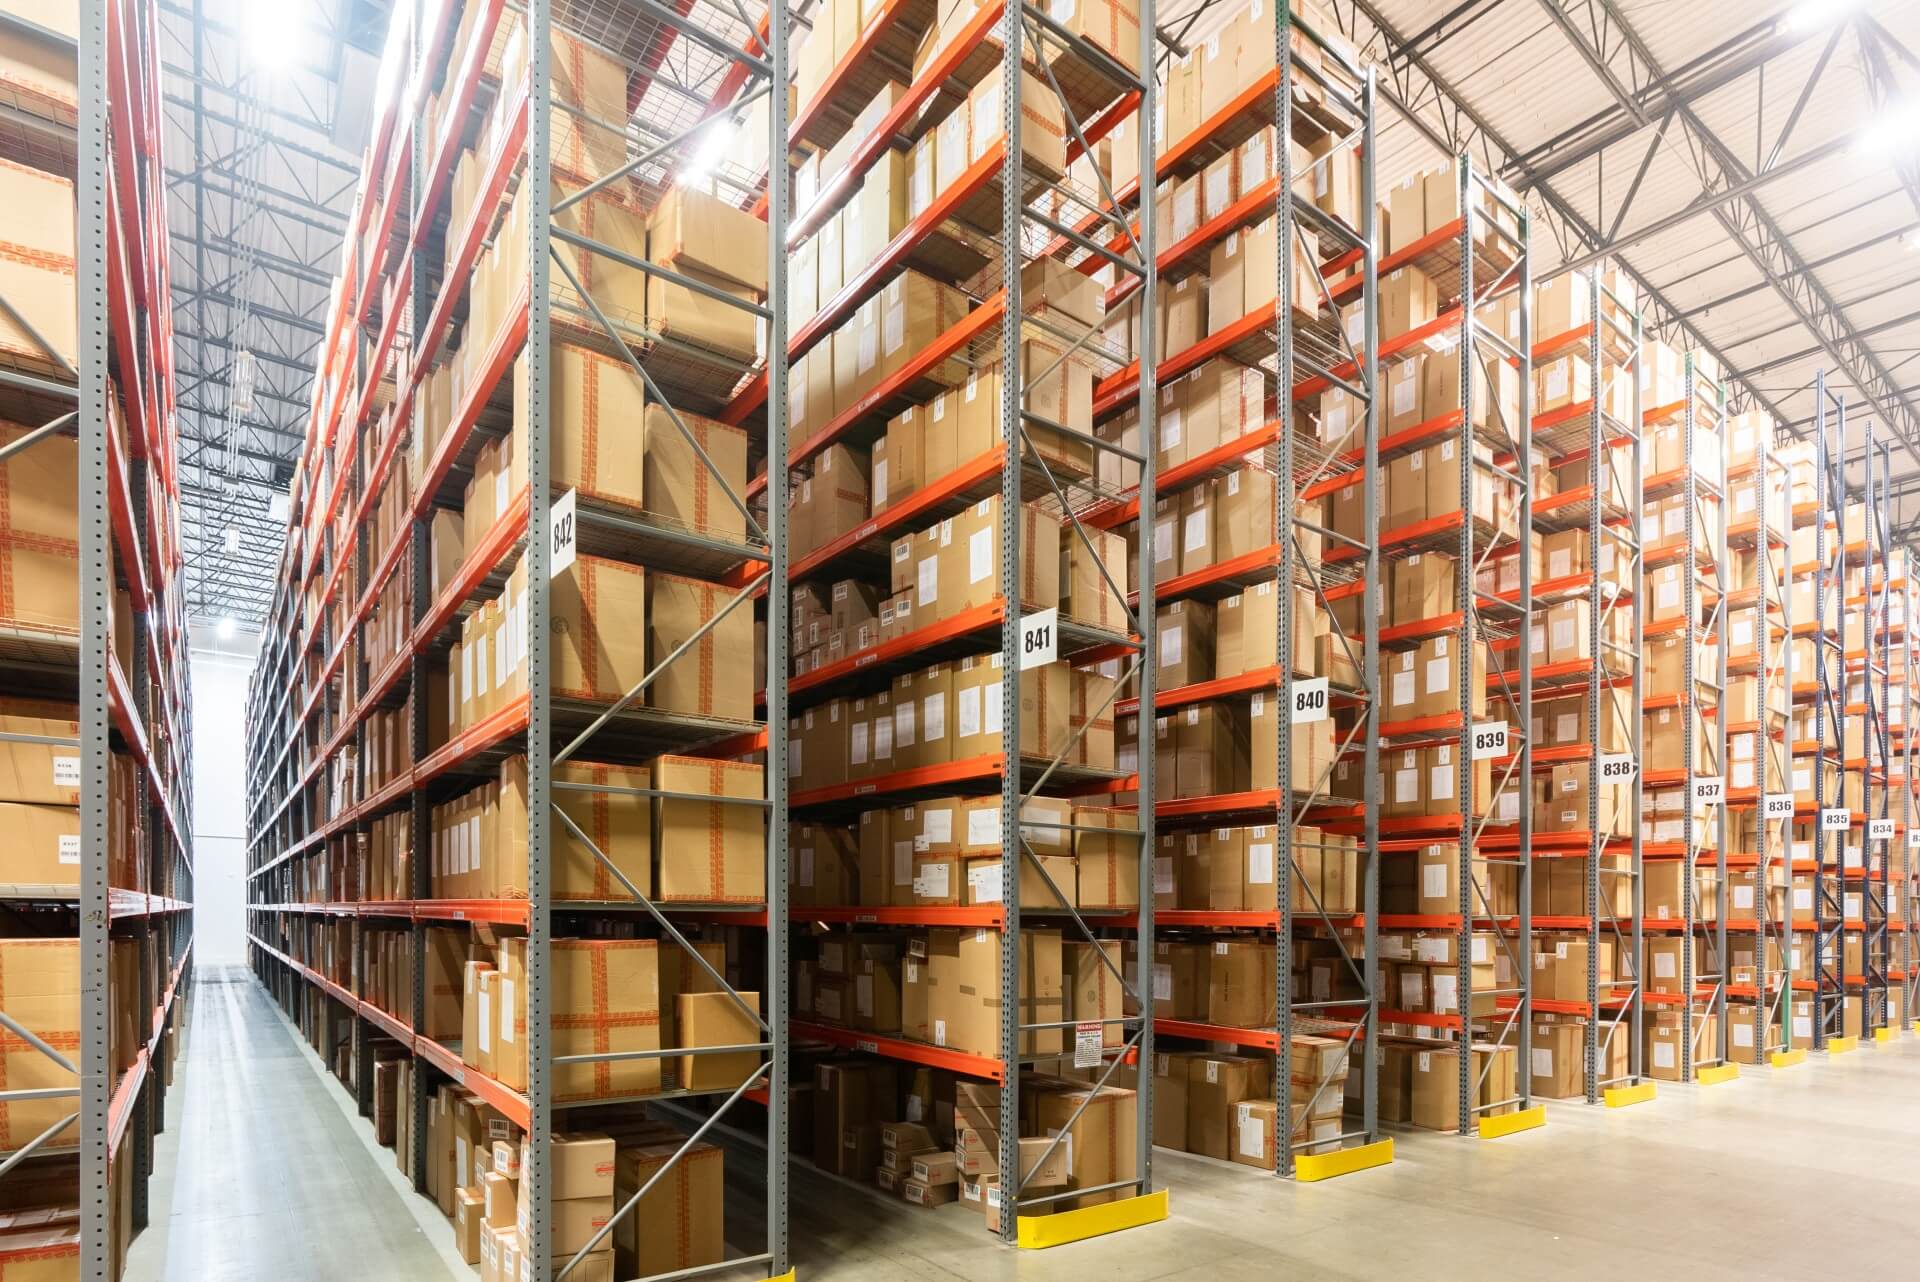 Are you wondering, “when should I be expanding my warehouse footprint or expand to a new market?”